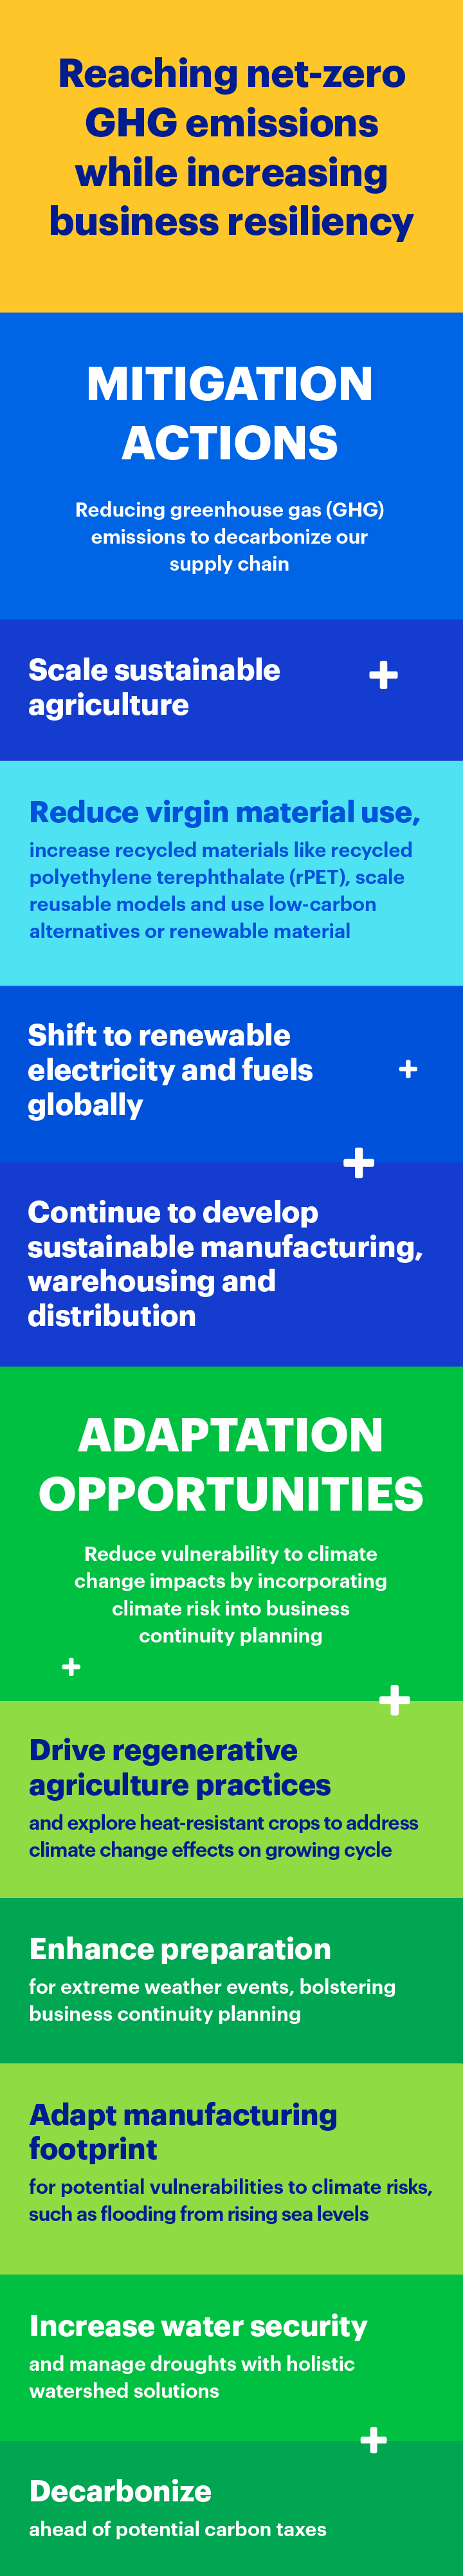 Infographic detailing the mitigation actions and adaptation opportunities inherent in our net-zero GHG emissions goal